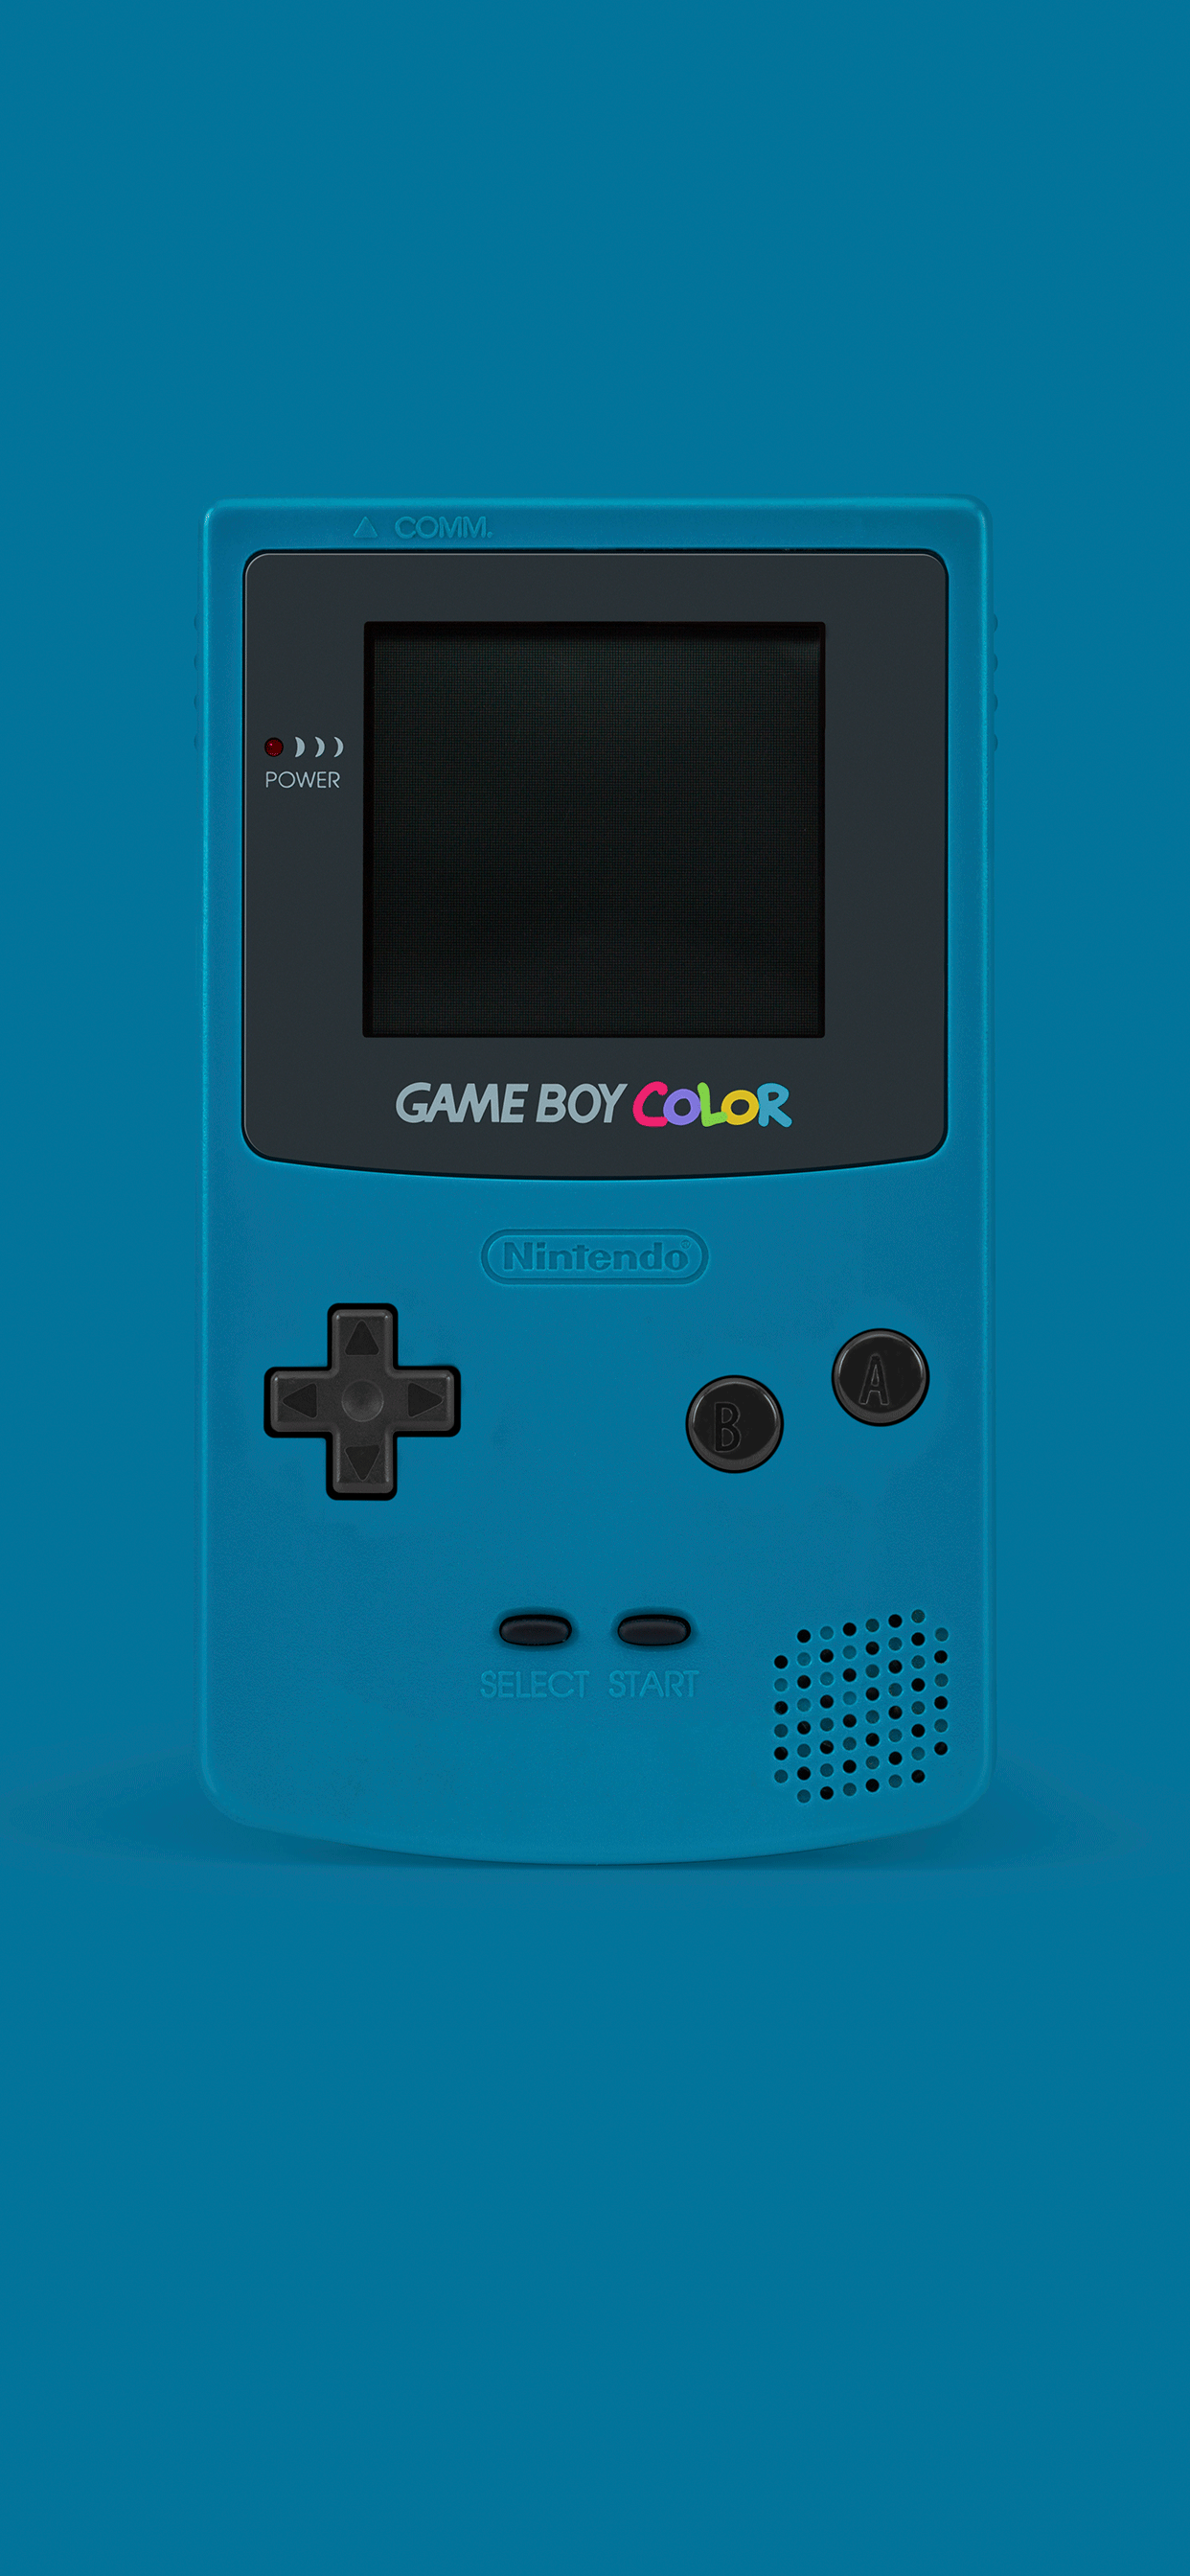 Game Boy Color Wallpaper for iPhone Pro Max, X, 6